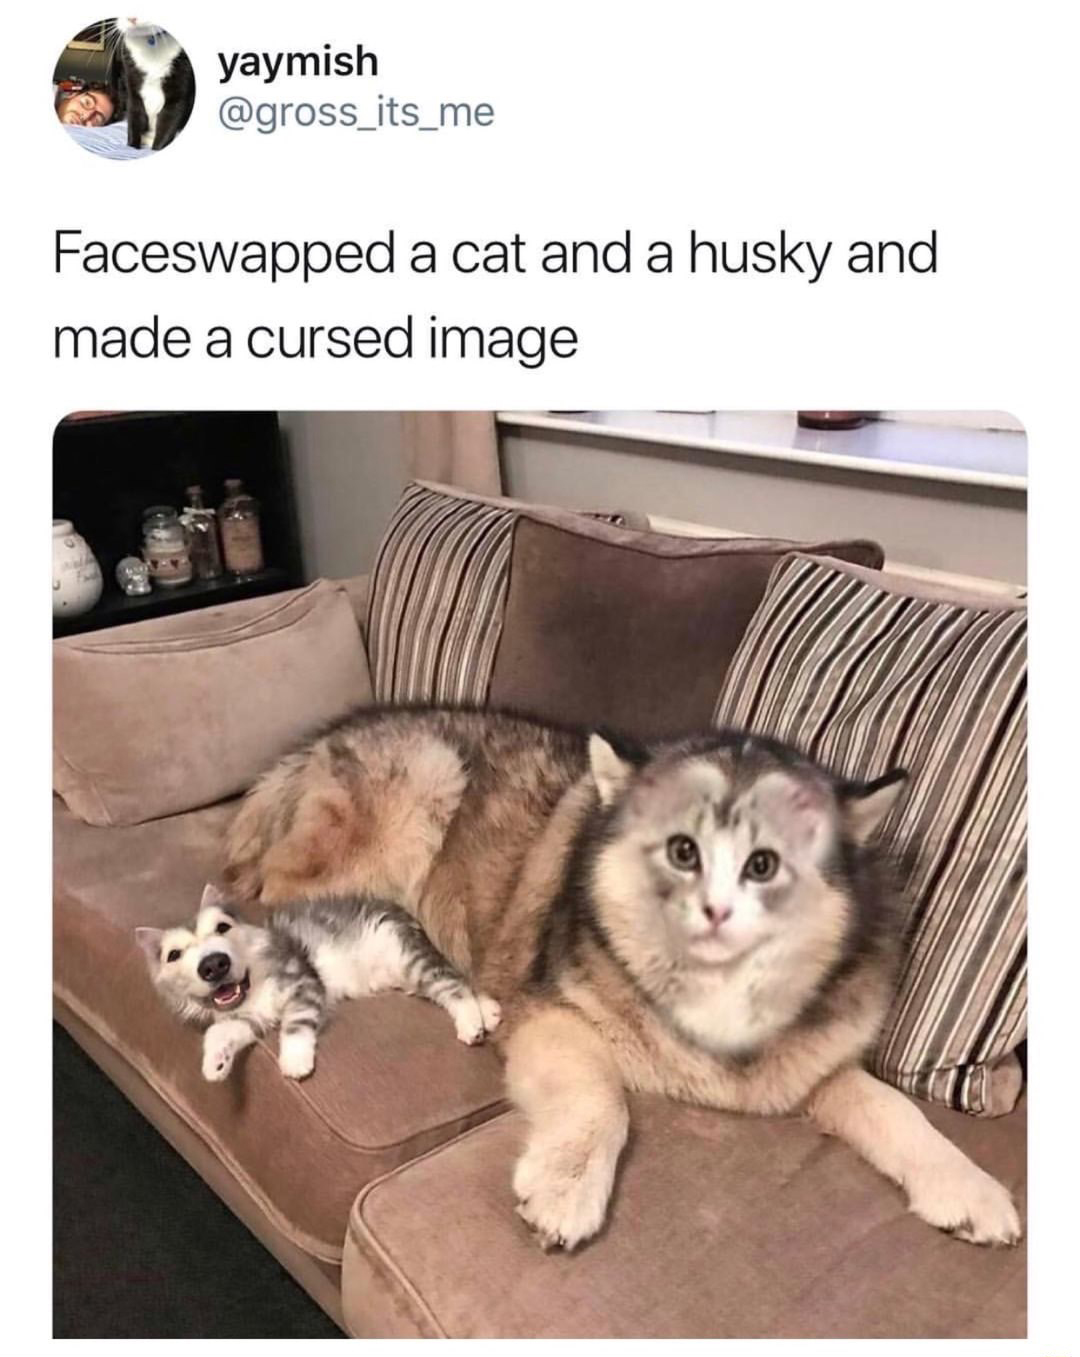 face swapped cat and husky - yaymish Faceswapped a cat and a husky and made a cursed image